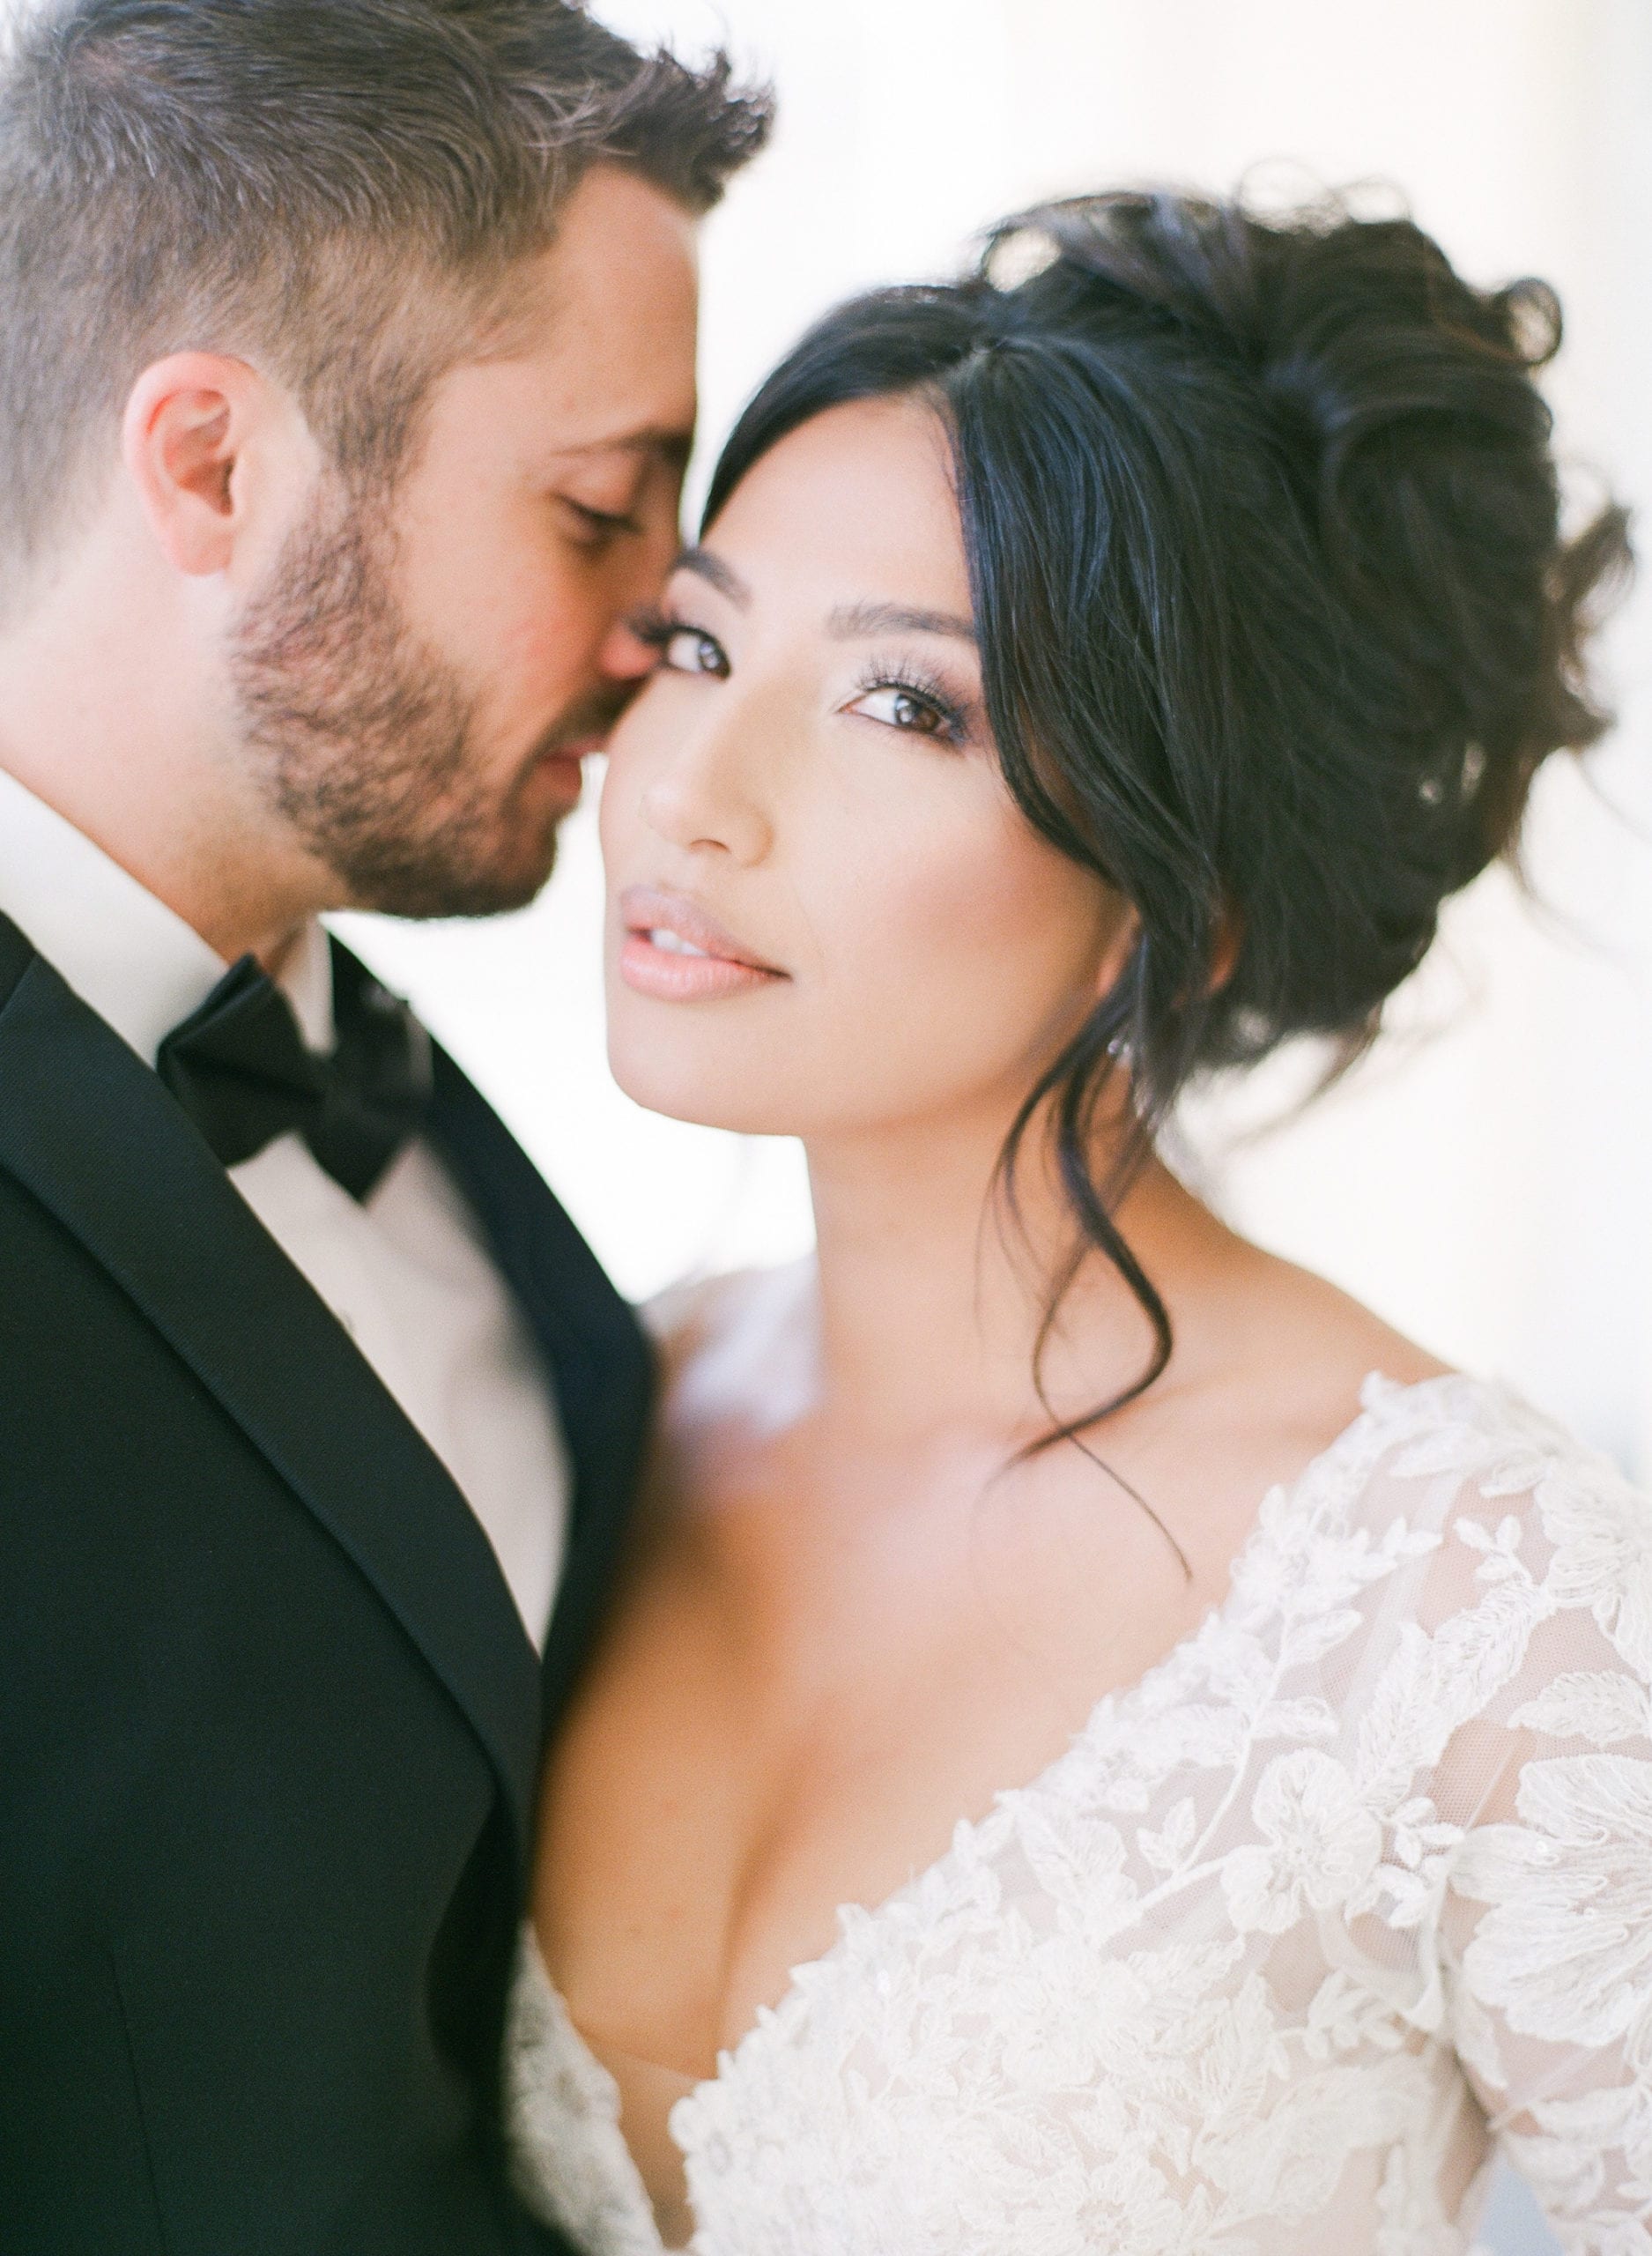 Styled Shoot Bride and Groom Snuggling Photo